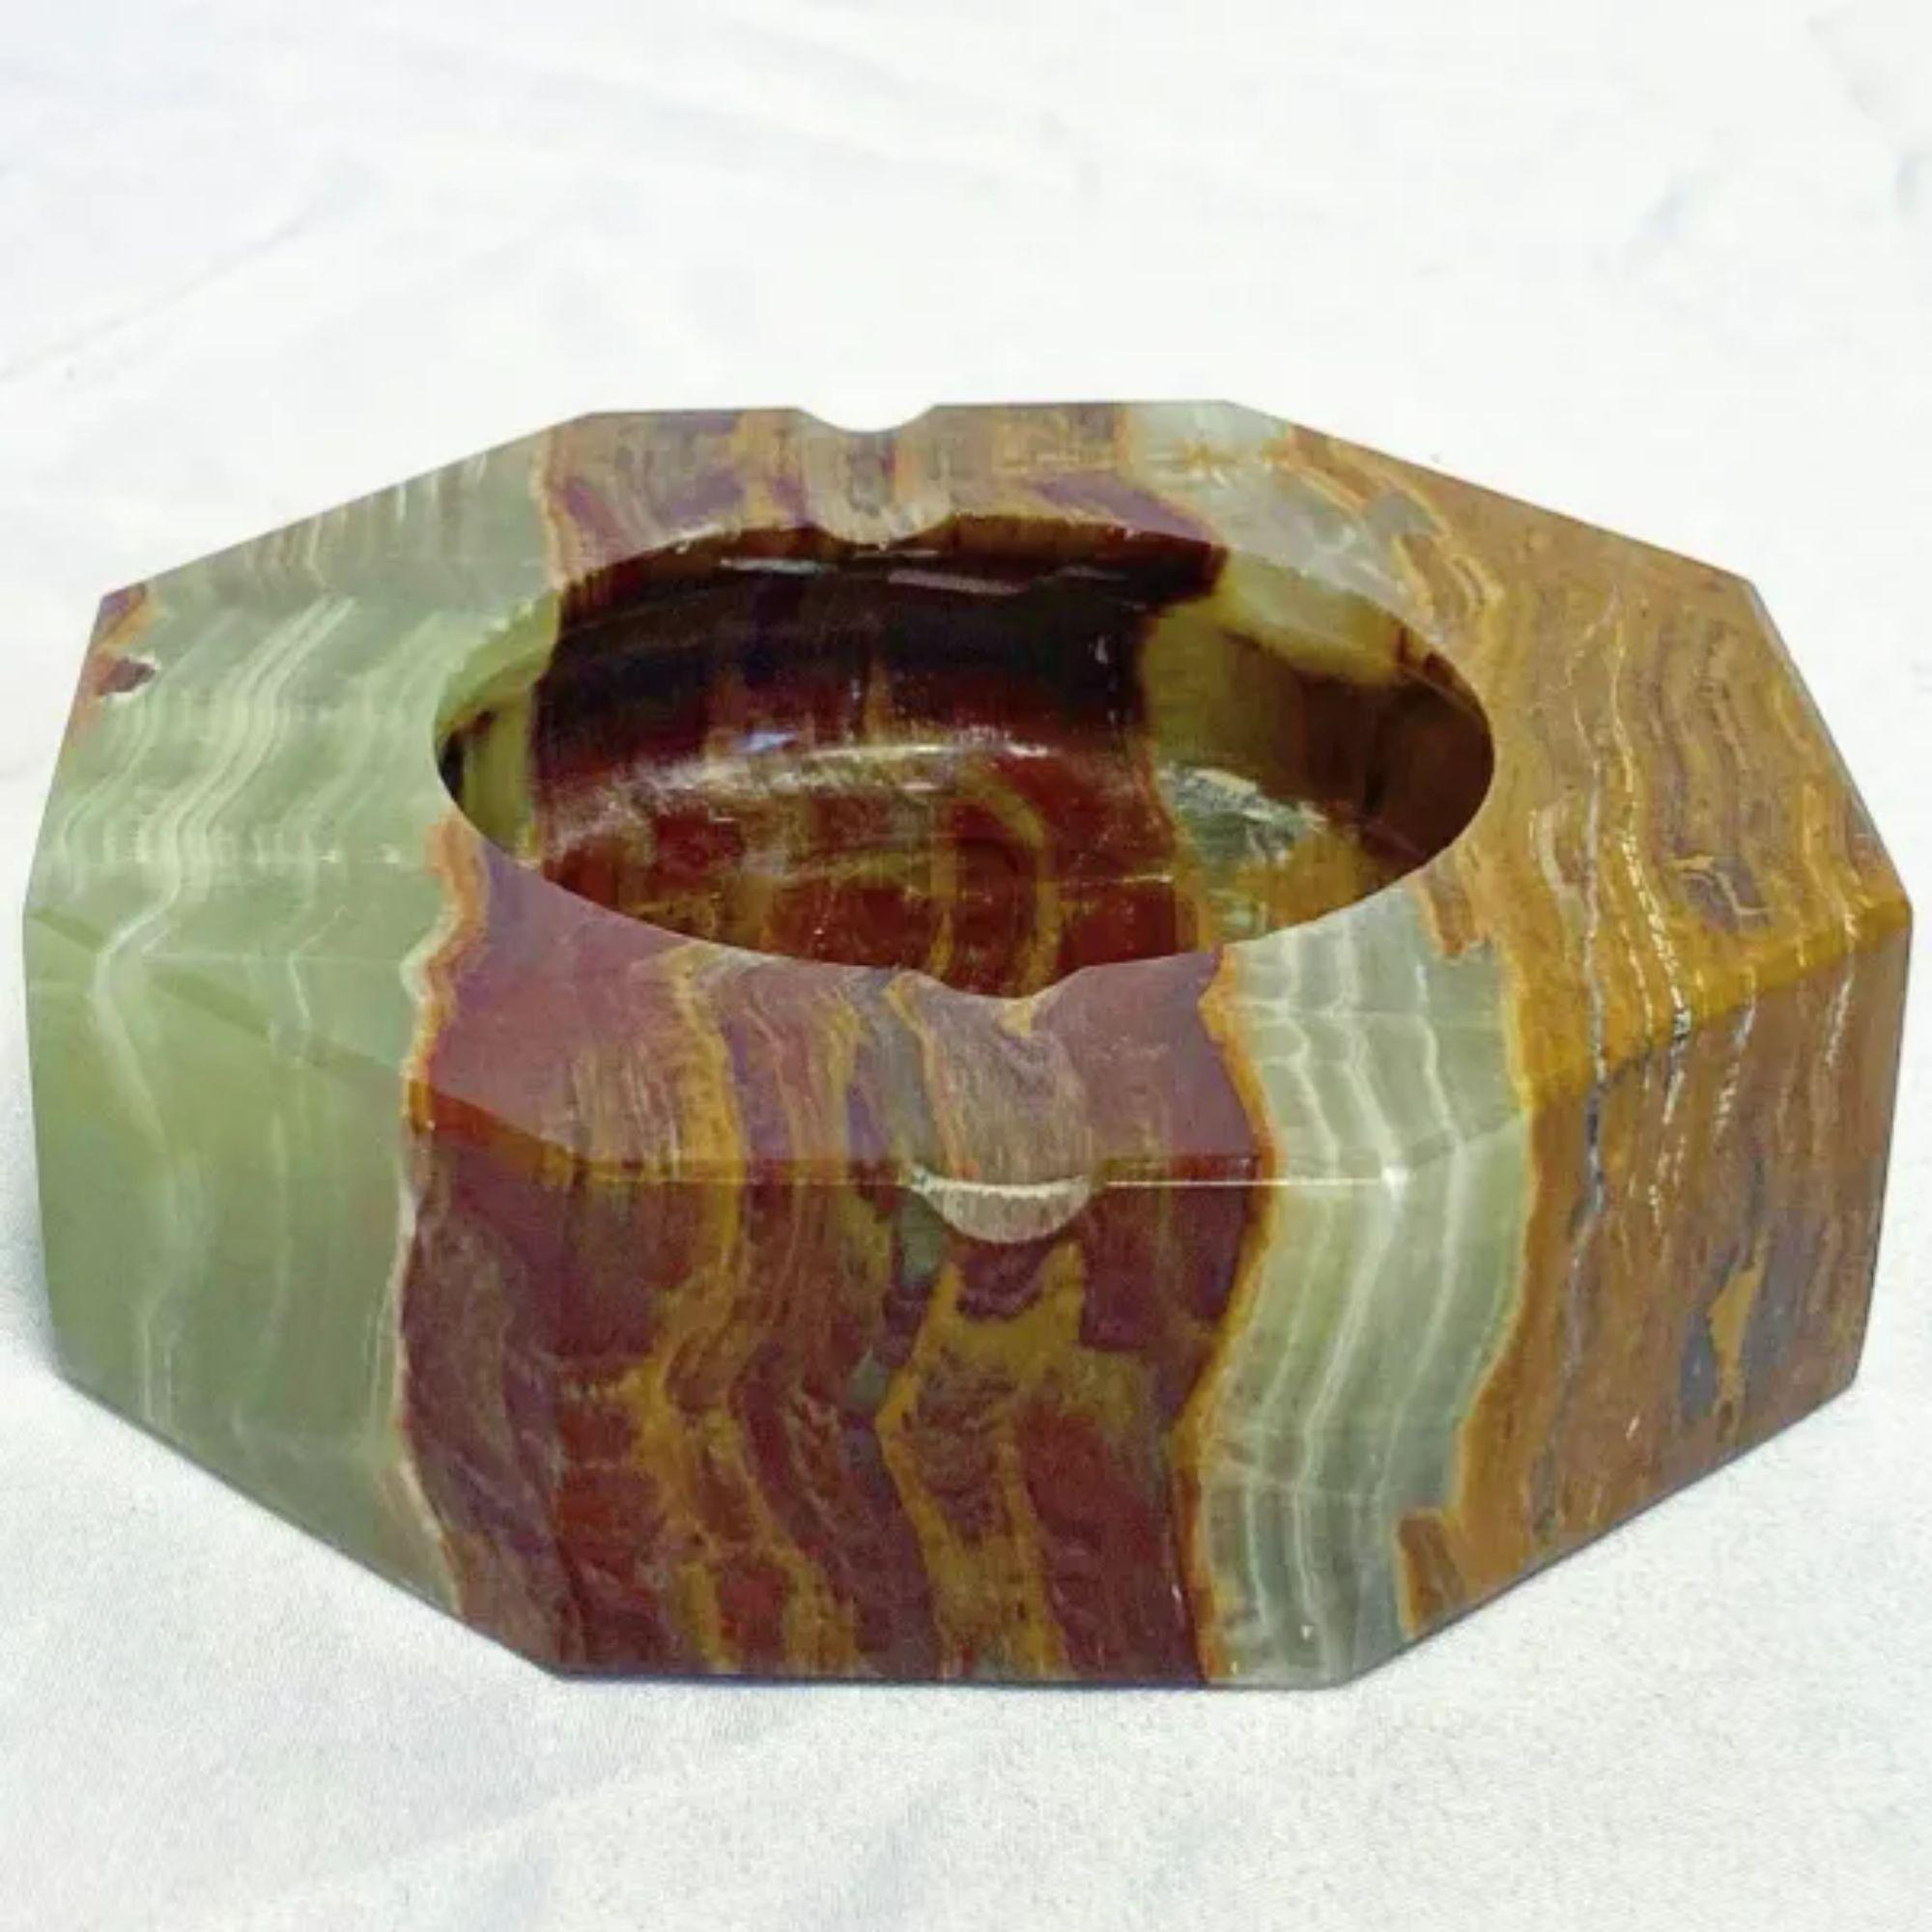 Solid Green Onyx Octagonal Ashtray in stripe colorations of green, burgundy, caramel, and brown with white veining.

Green Onyx is a symbol of purity and restfulness. It has the power to relieve you of your worries, fears, tension, and stress. Its